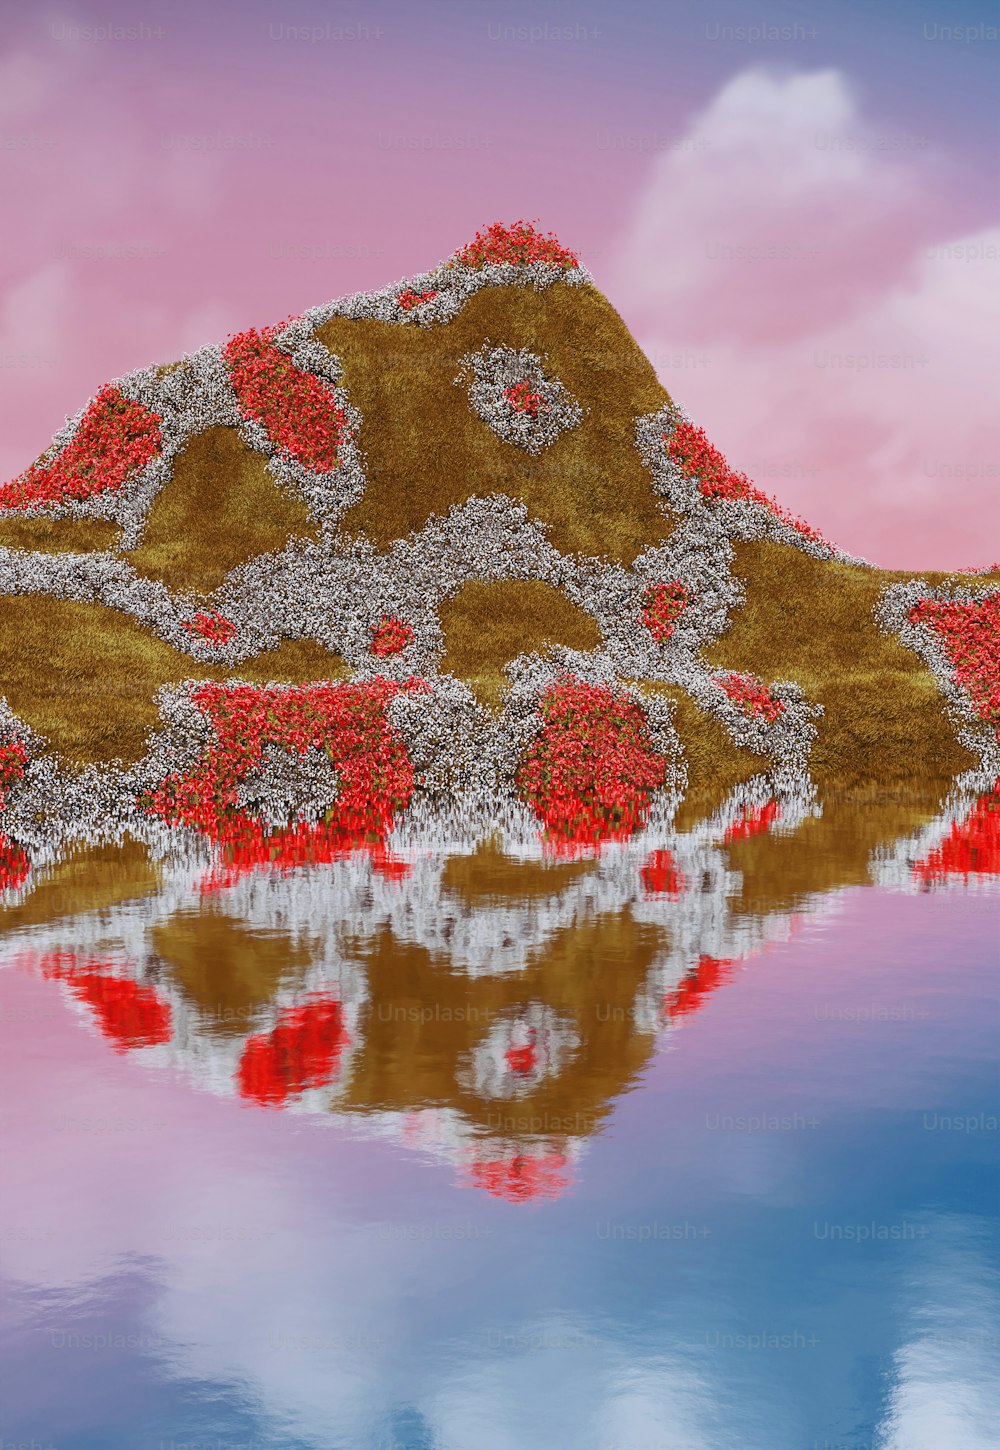 a painting of a mountain with red flowers on it